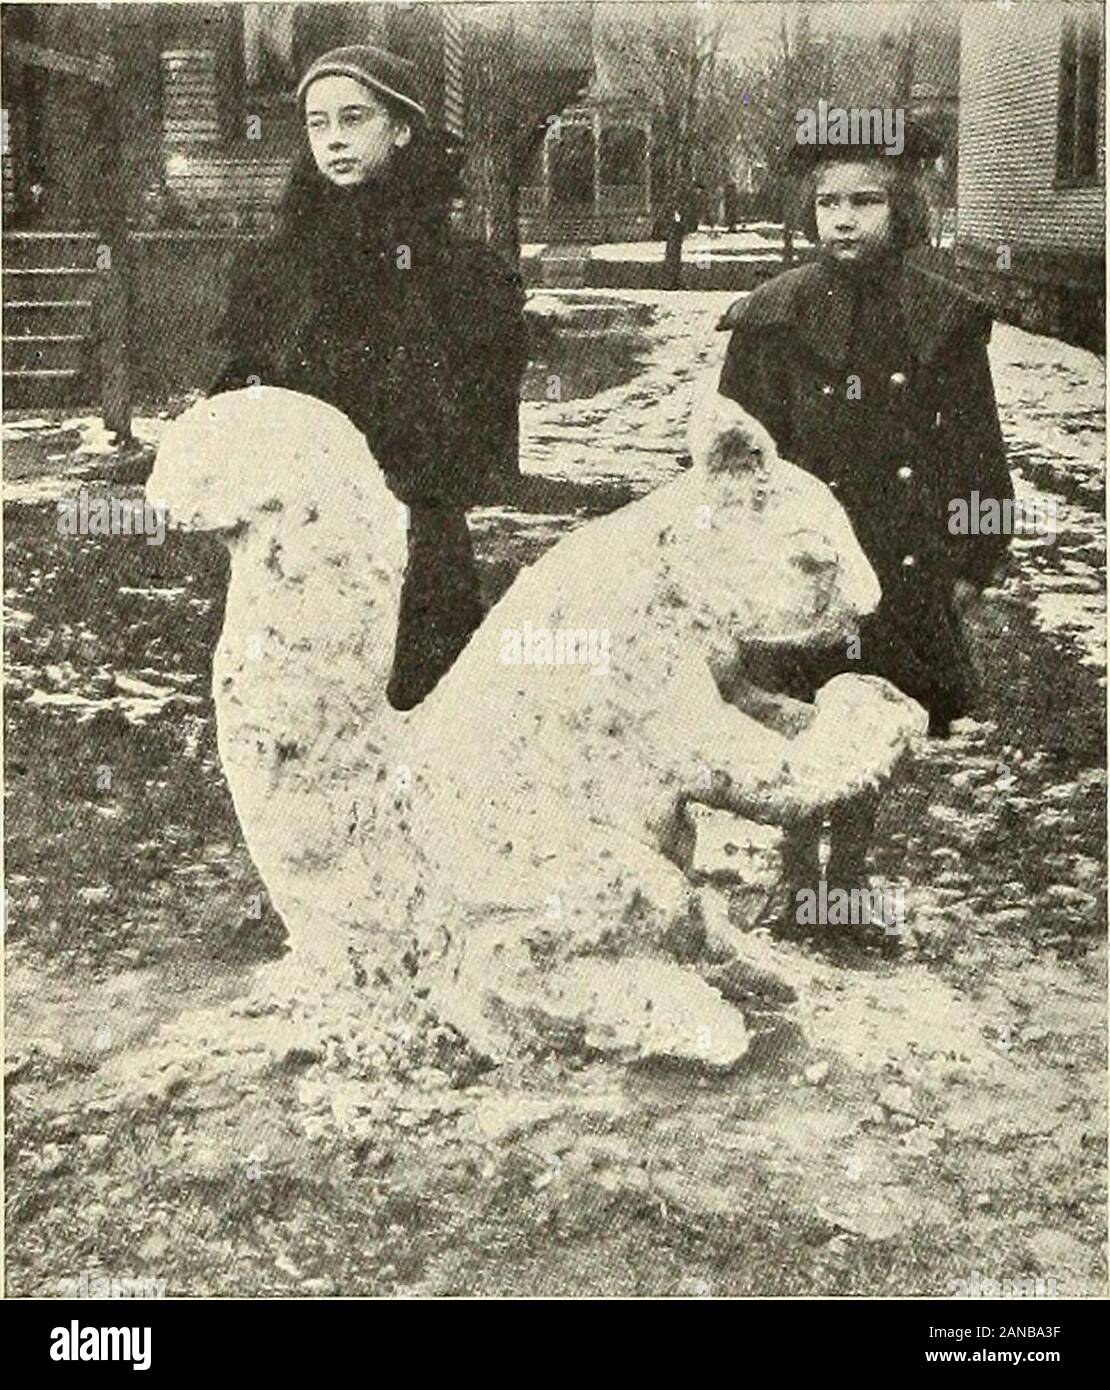 StNicholas [serial] . a snow squirrel Columbus, Ohio.Dear St. Nicholas : I saw the snow figures in theJanuary number and am sending you a picture of a snow. THE SNOW SQUIRREL. squirrel my brother made in our back yard. I remainLovingly yours, Mildred Fisher. This is well done. Who has a photograph ofsnow sculpturing as good as this? picking trailing arbutus Traverse City, Mich.Dear St. Nicholas: One day last spring I went out forarbutus. I went out on the peninsula road and I got awhole basket full of it. It does not grow so thick as itused to, for it has been pulled up by the roots. The color Stock Photo